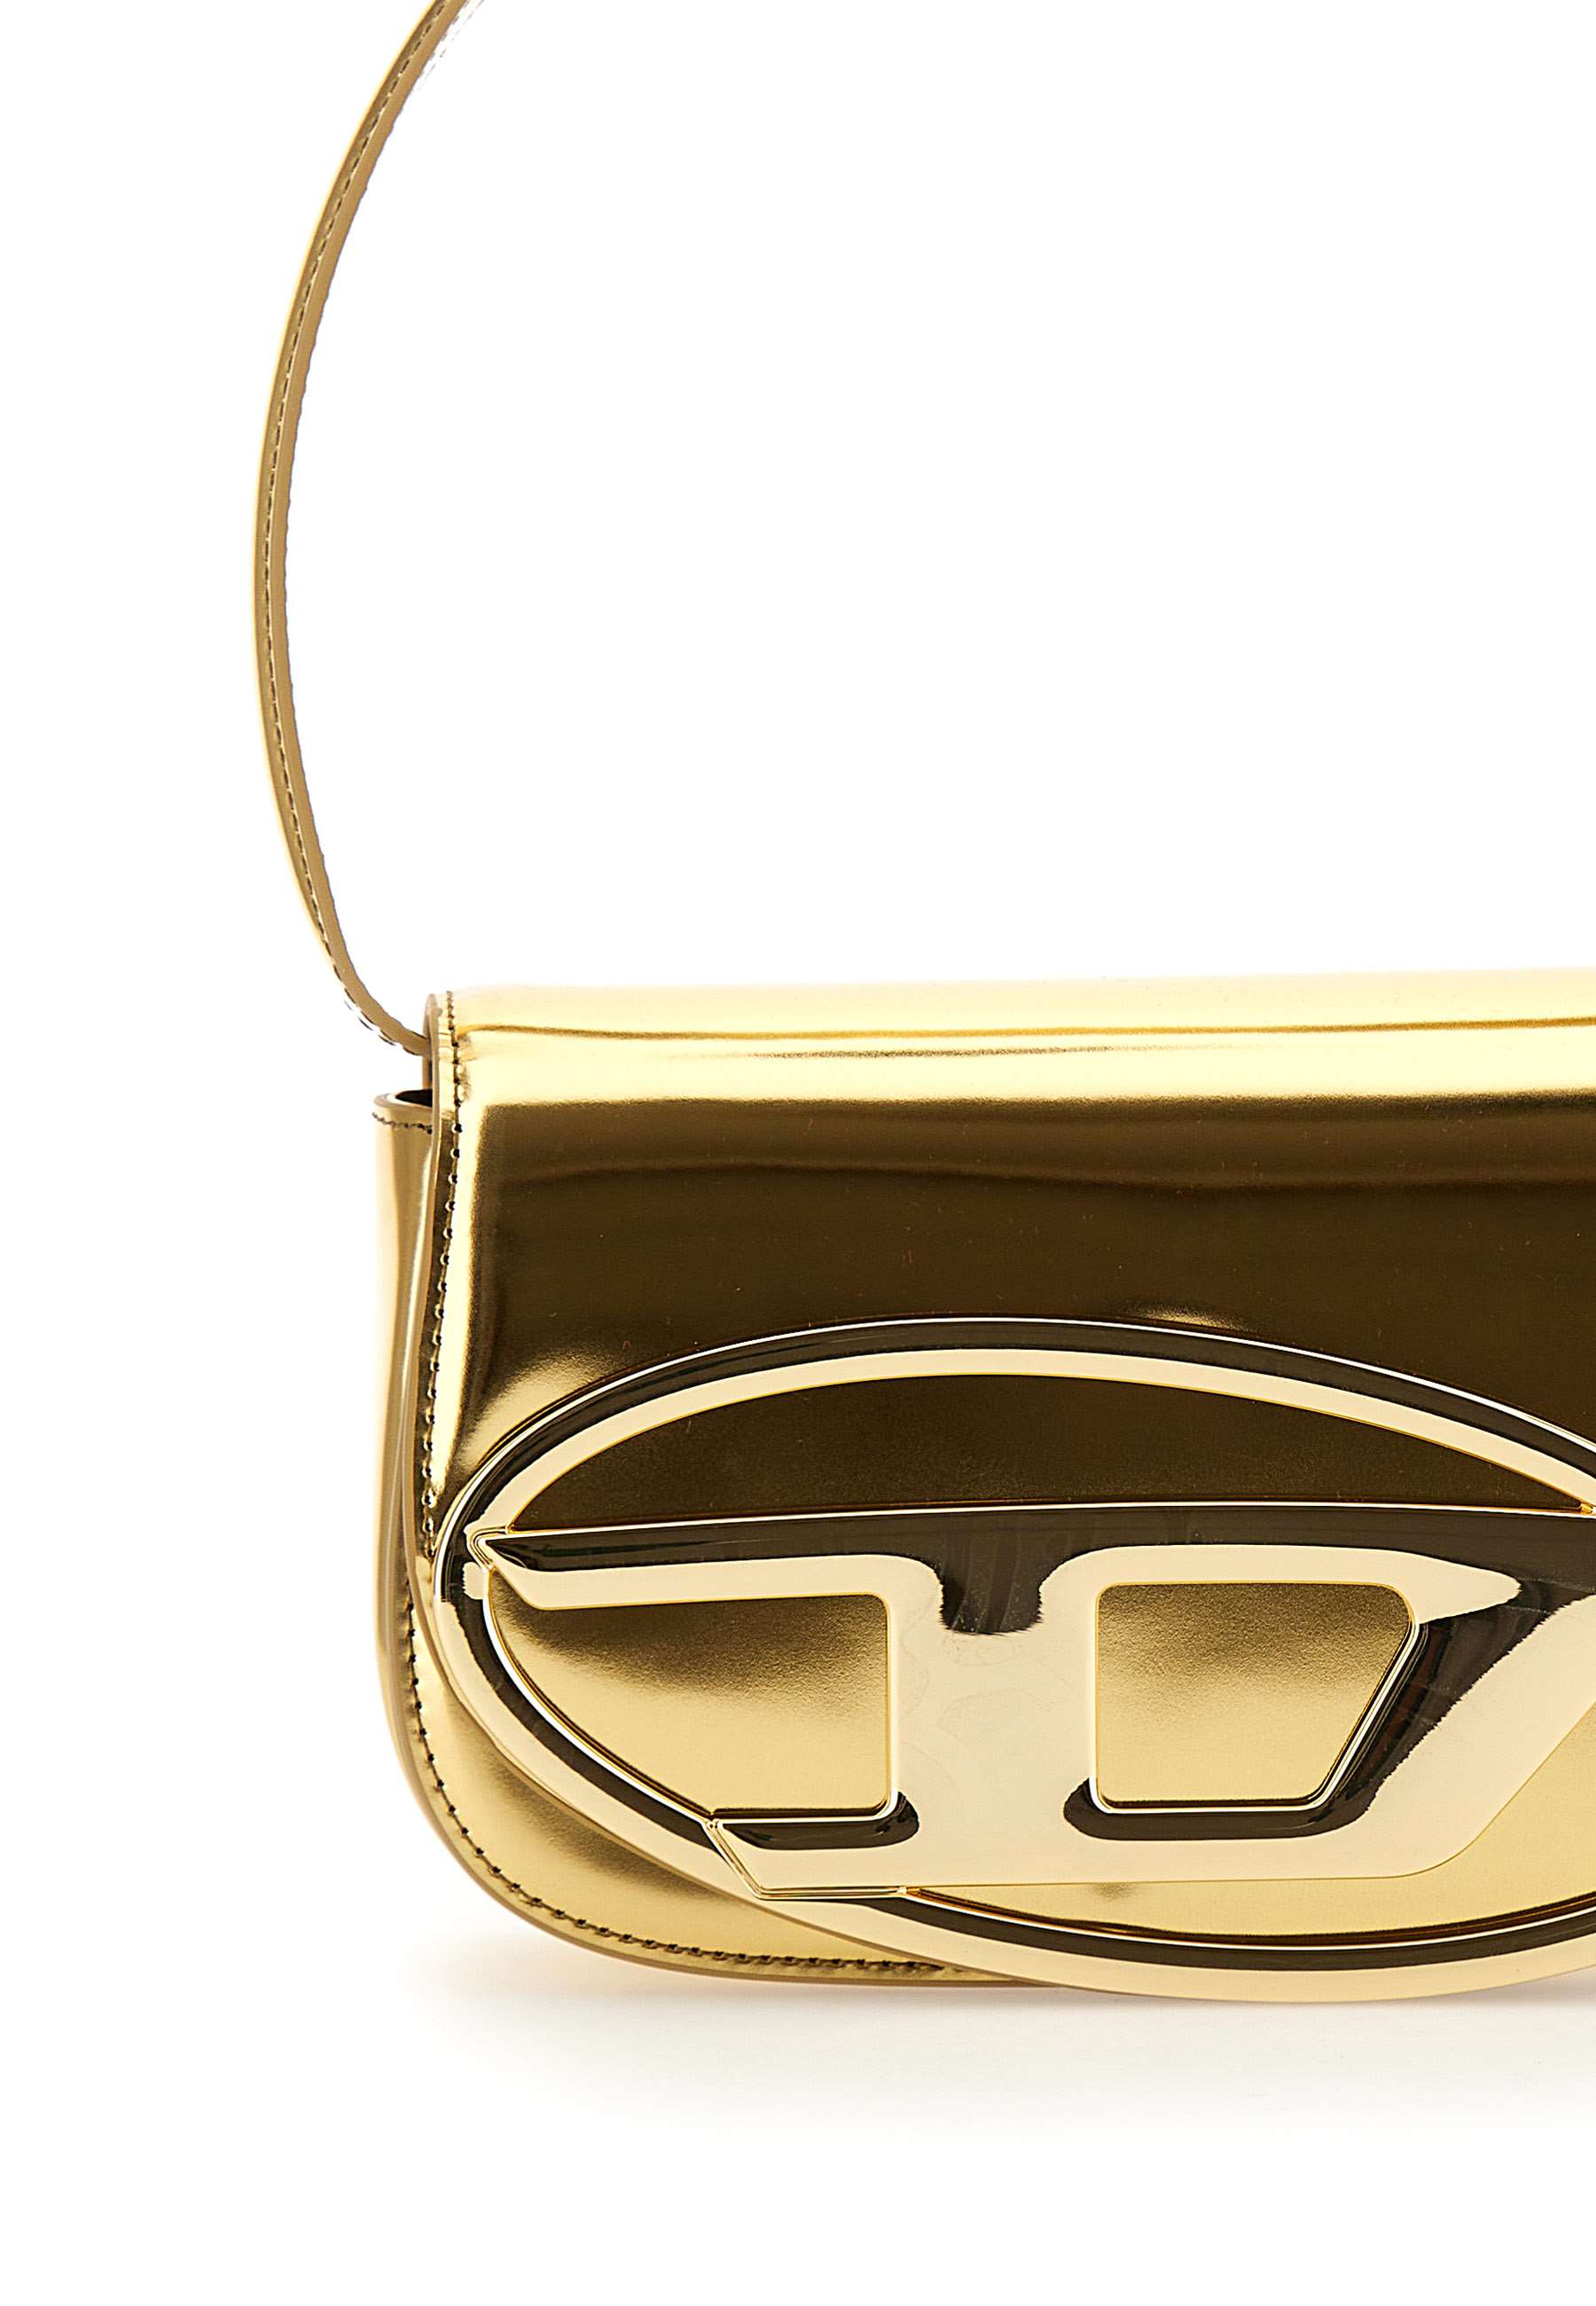 1DR Woman: Shoulder bag in mirrored leather